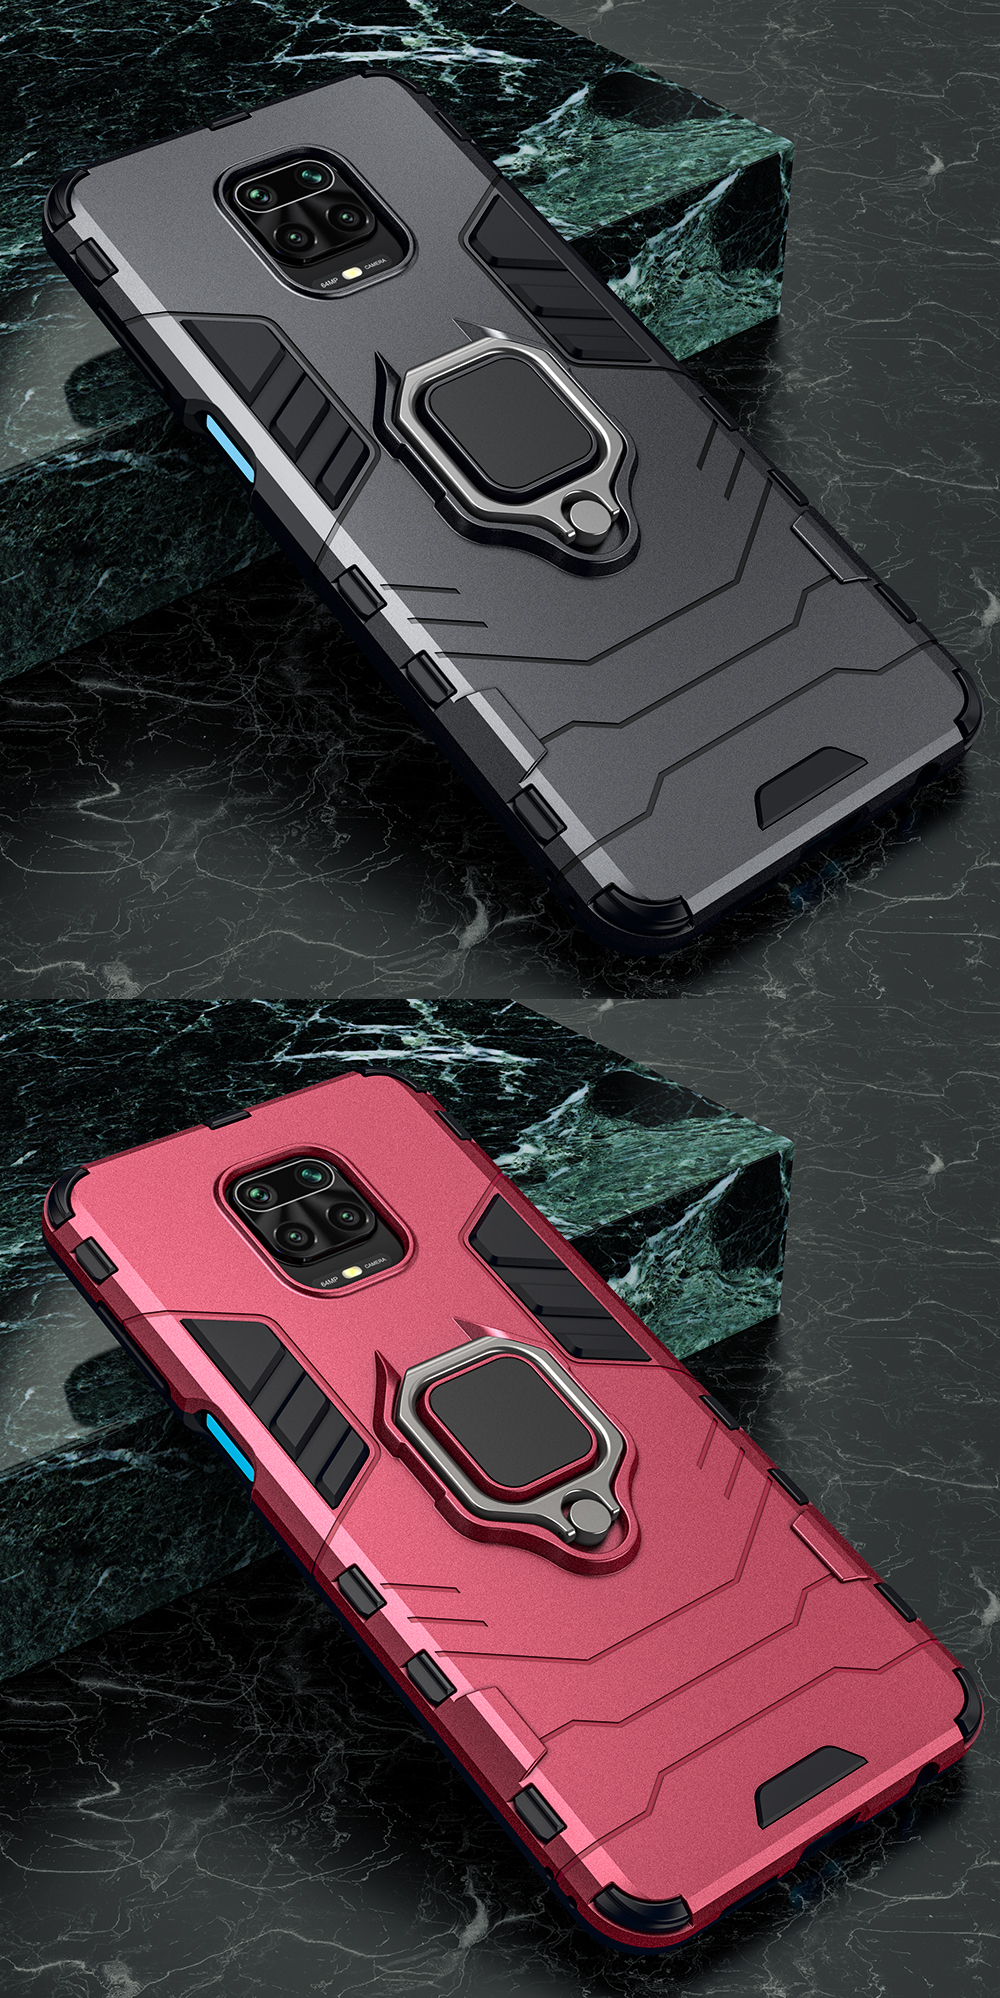 Bakeey Armor Shockproof Magnetic with 360 Rotation Finger Ring Holder Stand PC Protective Case for Xiaomi Redmi Note 9S / Redmi Note 9 Pro / Redmi Note 9 Pro Max Non-original